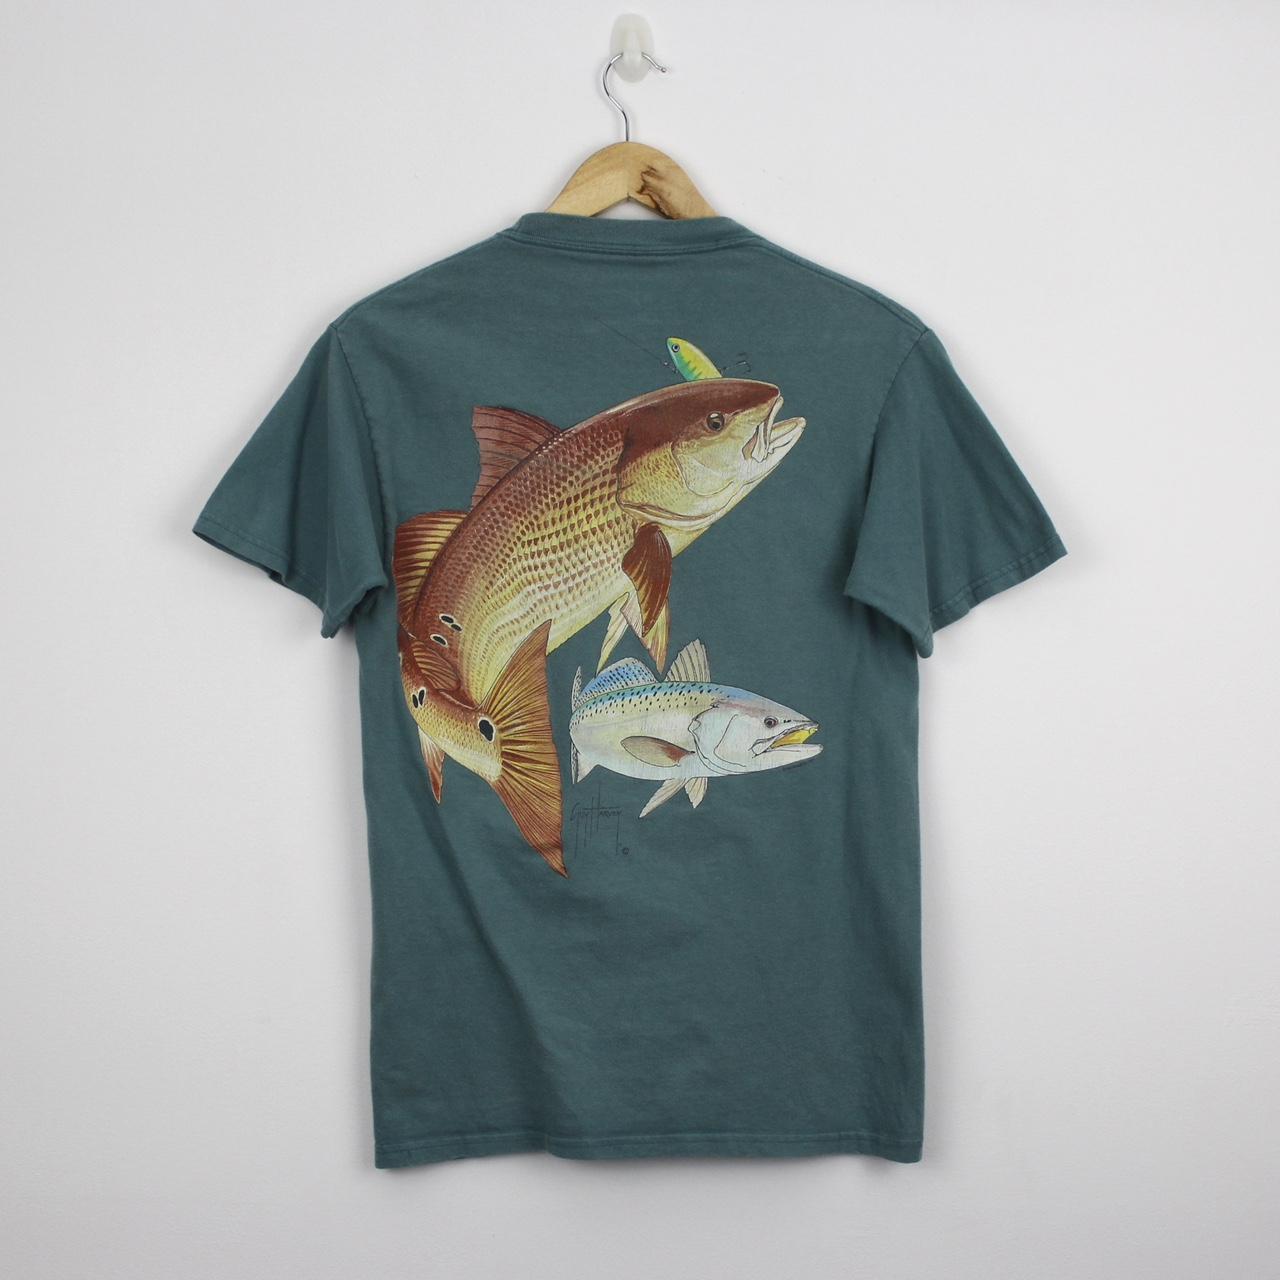 Vintage Fishing T-Shirt by Guy Harvey, Nice Faded